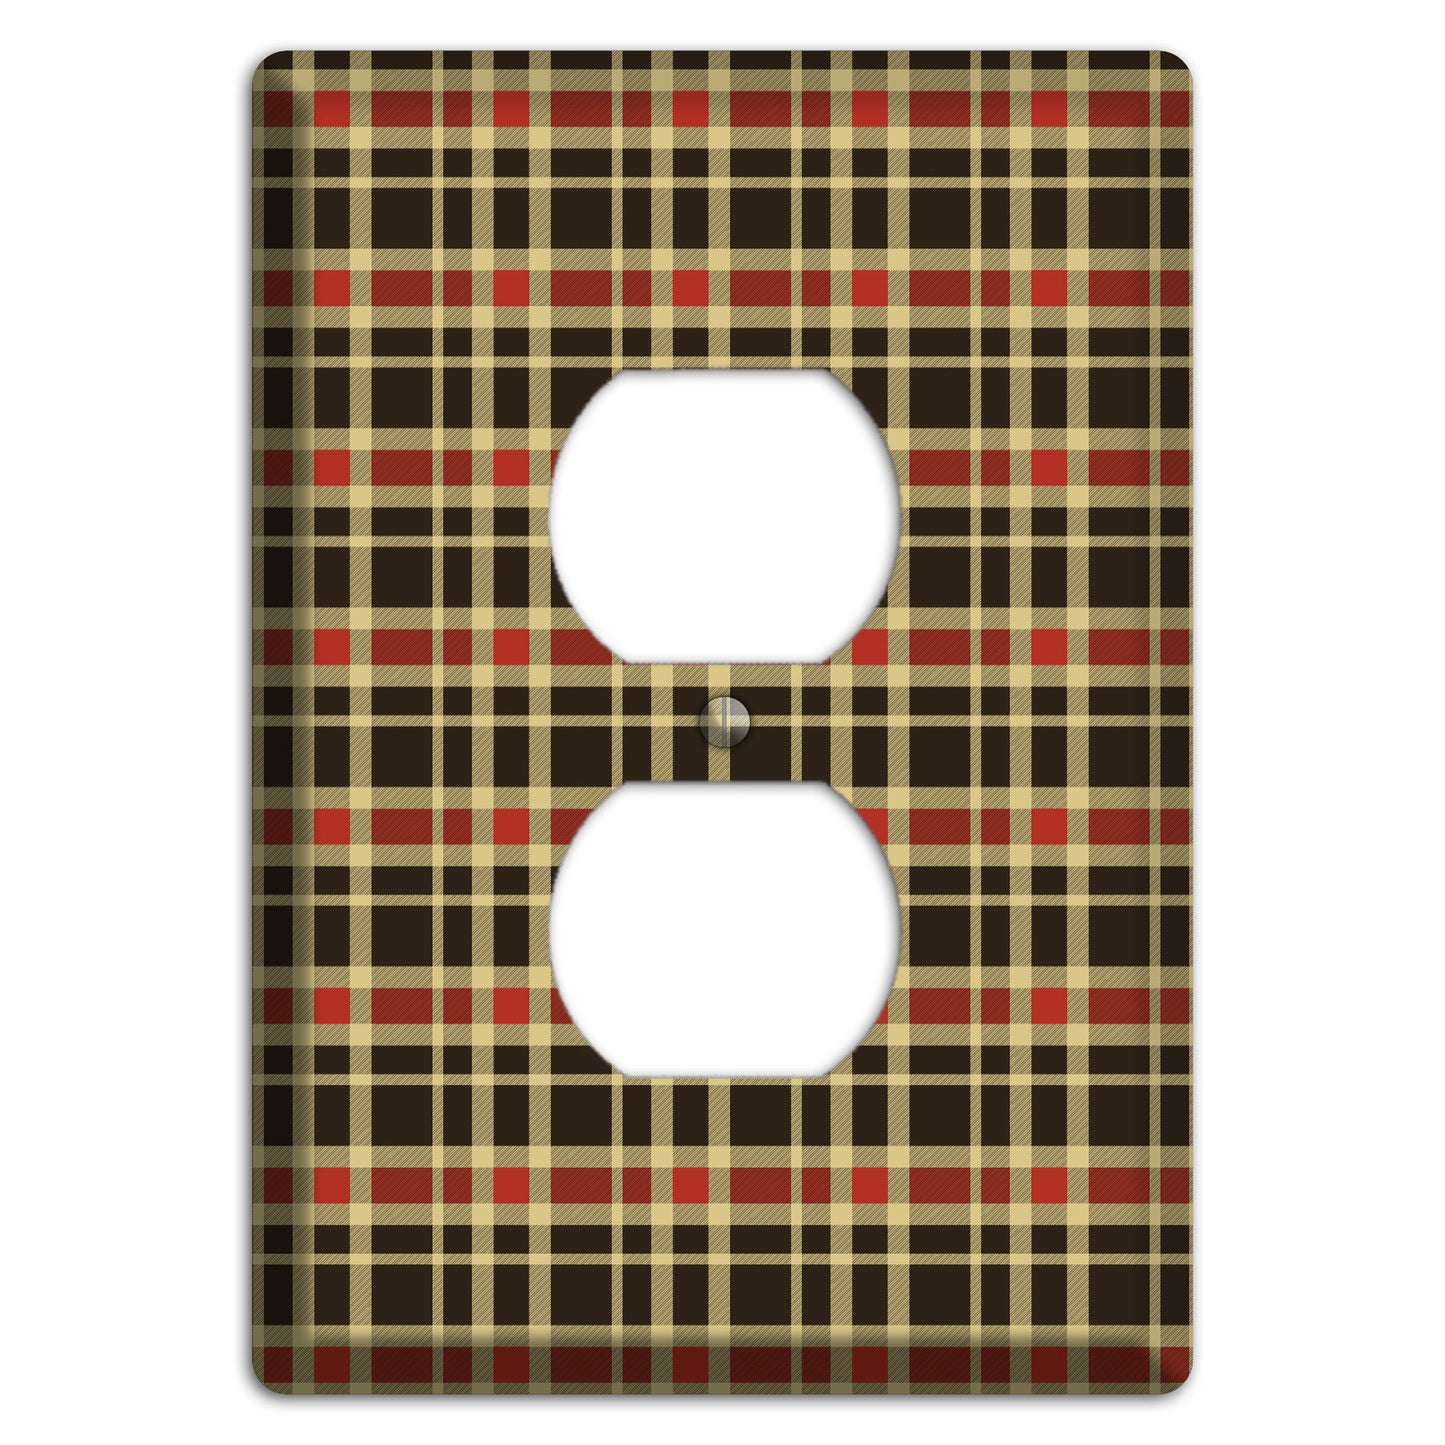 Maroon and Black Plaid Duplex Outlet Wallplate